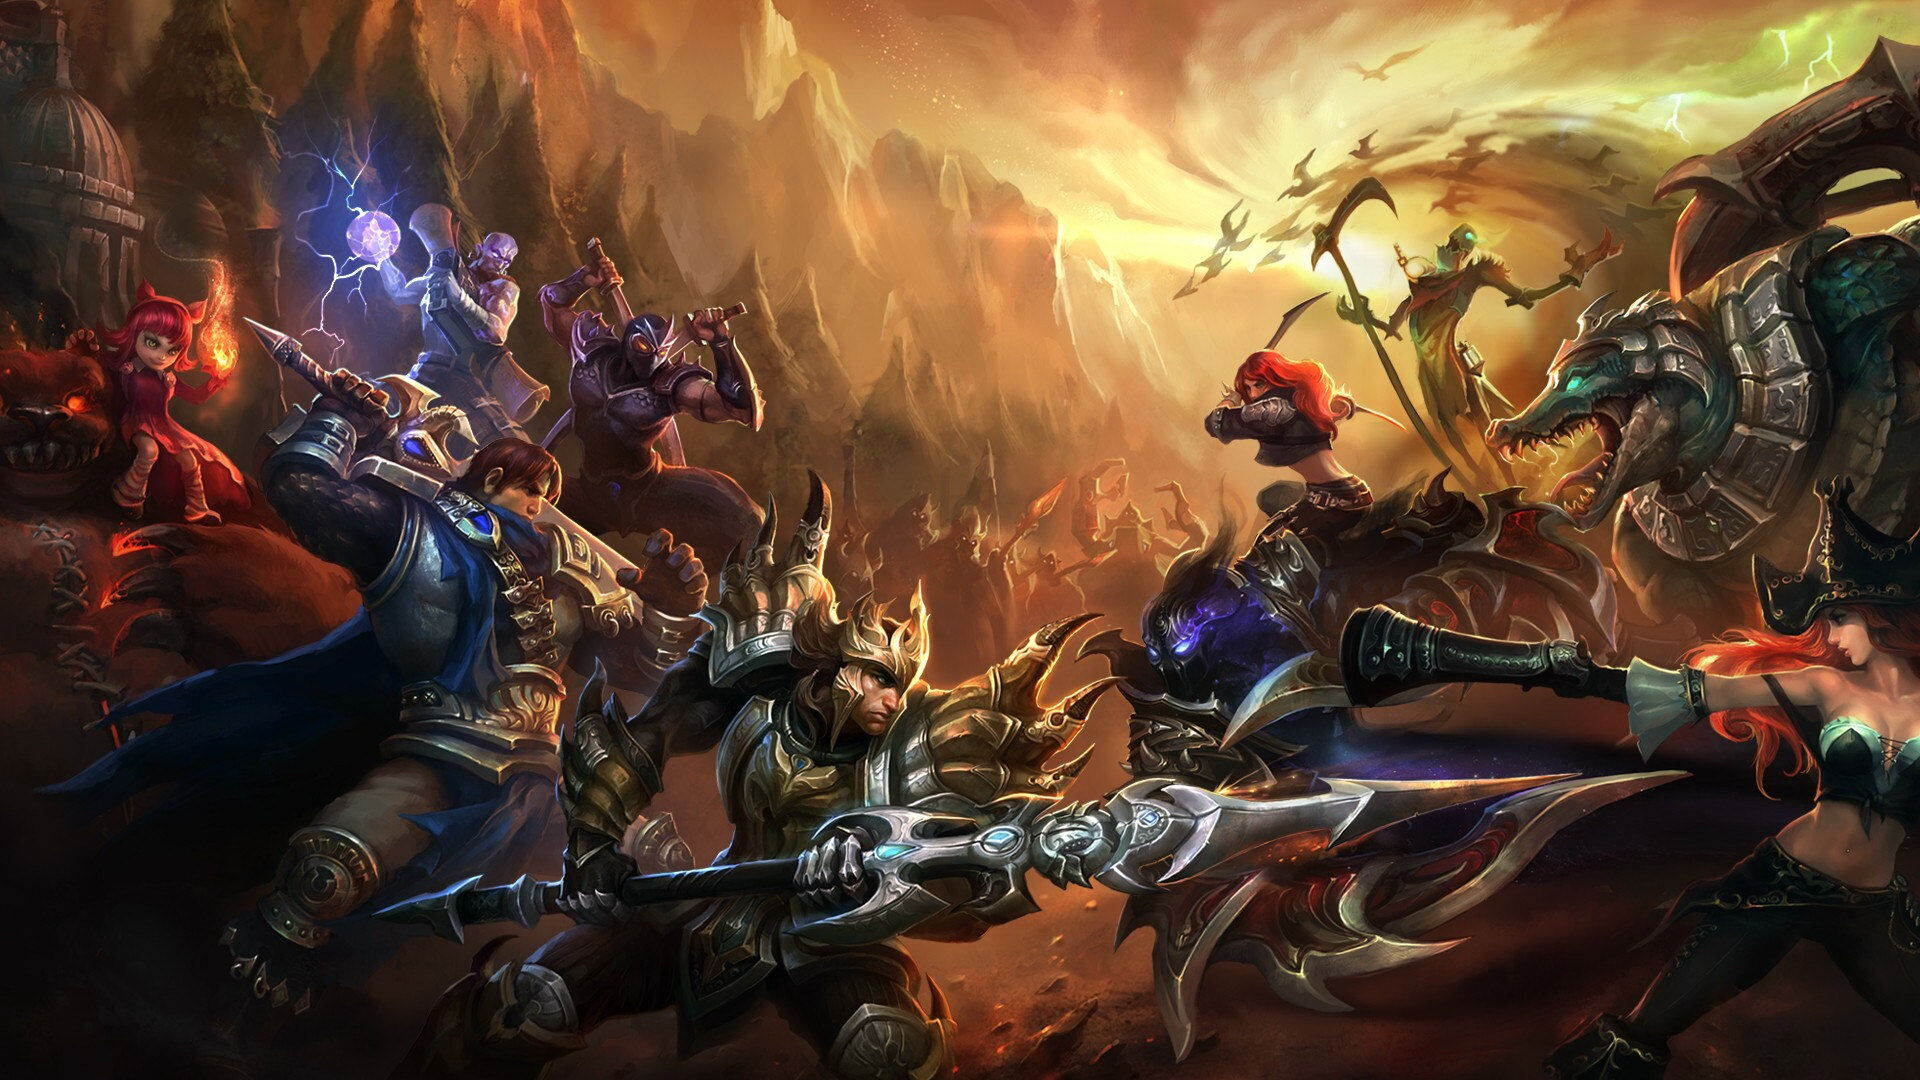 League of Legends spin-off director let go amid Riot Games layoffs : r/Games